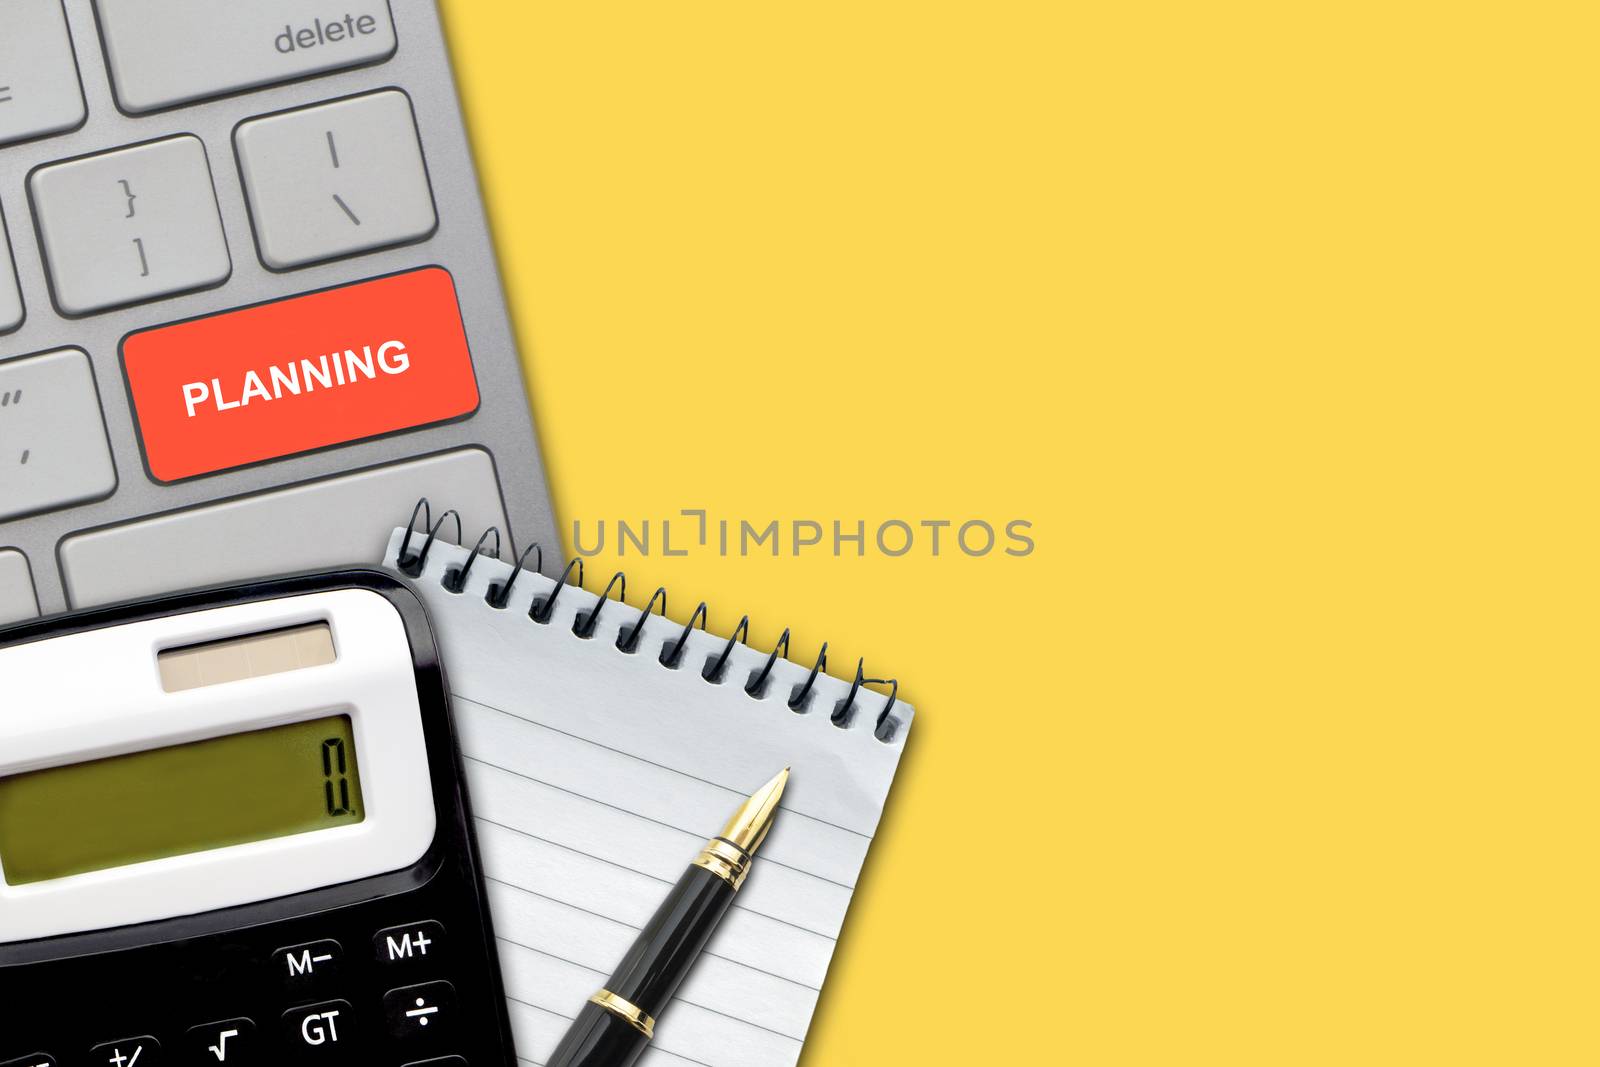 PLANNING text with pen, calculator, notepad and keyboard on the yellow background by silverwings